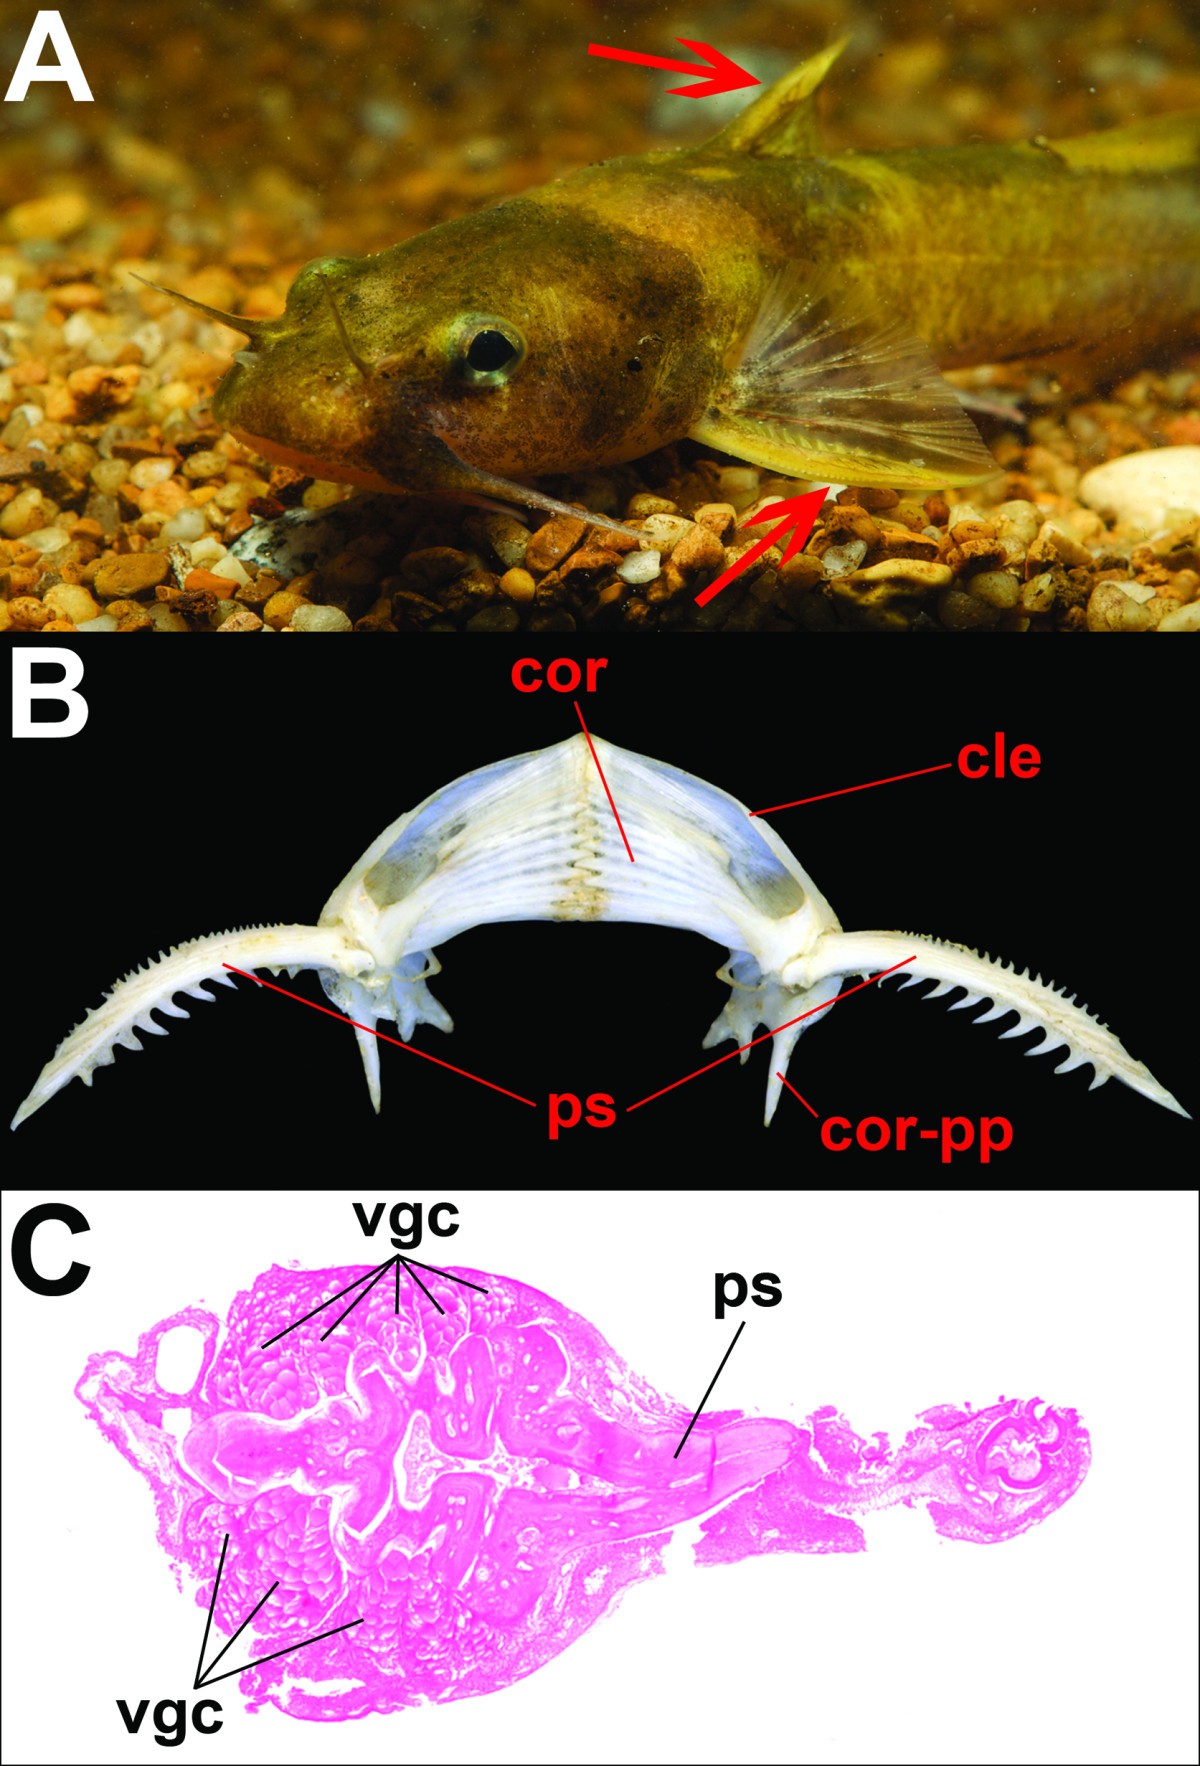 Diversity, phylogenetic distribution, and origins of venomous catfishes, BMC Ecology and Evolution